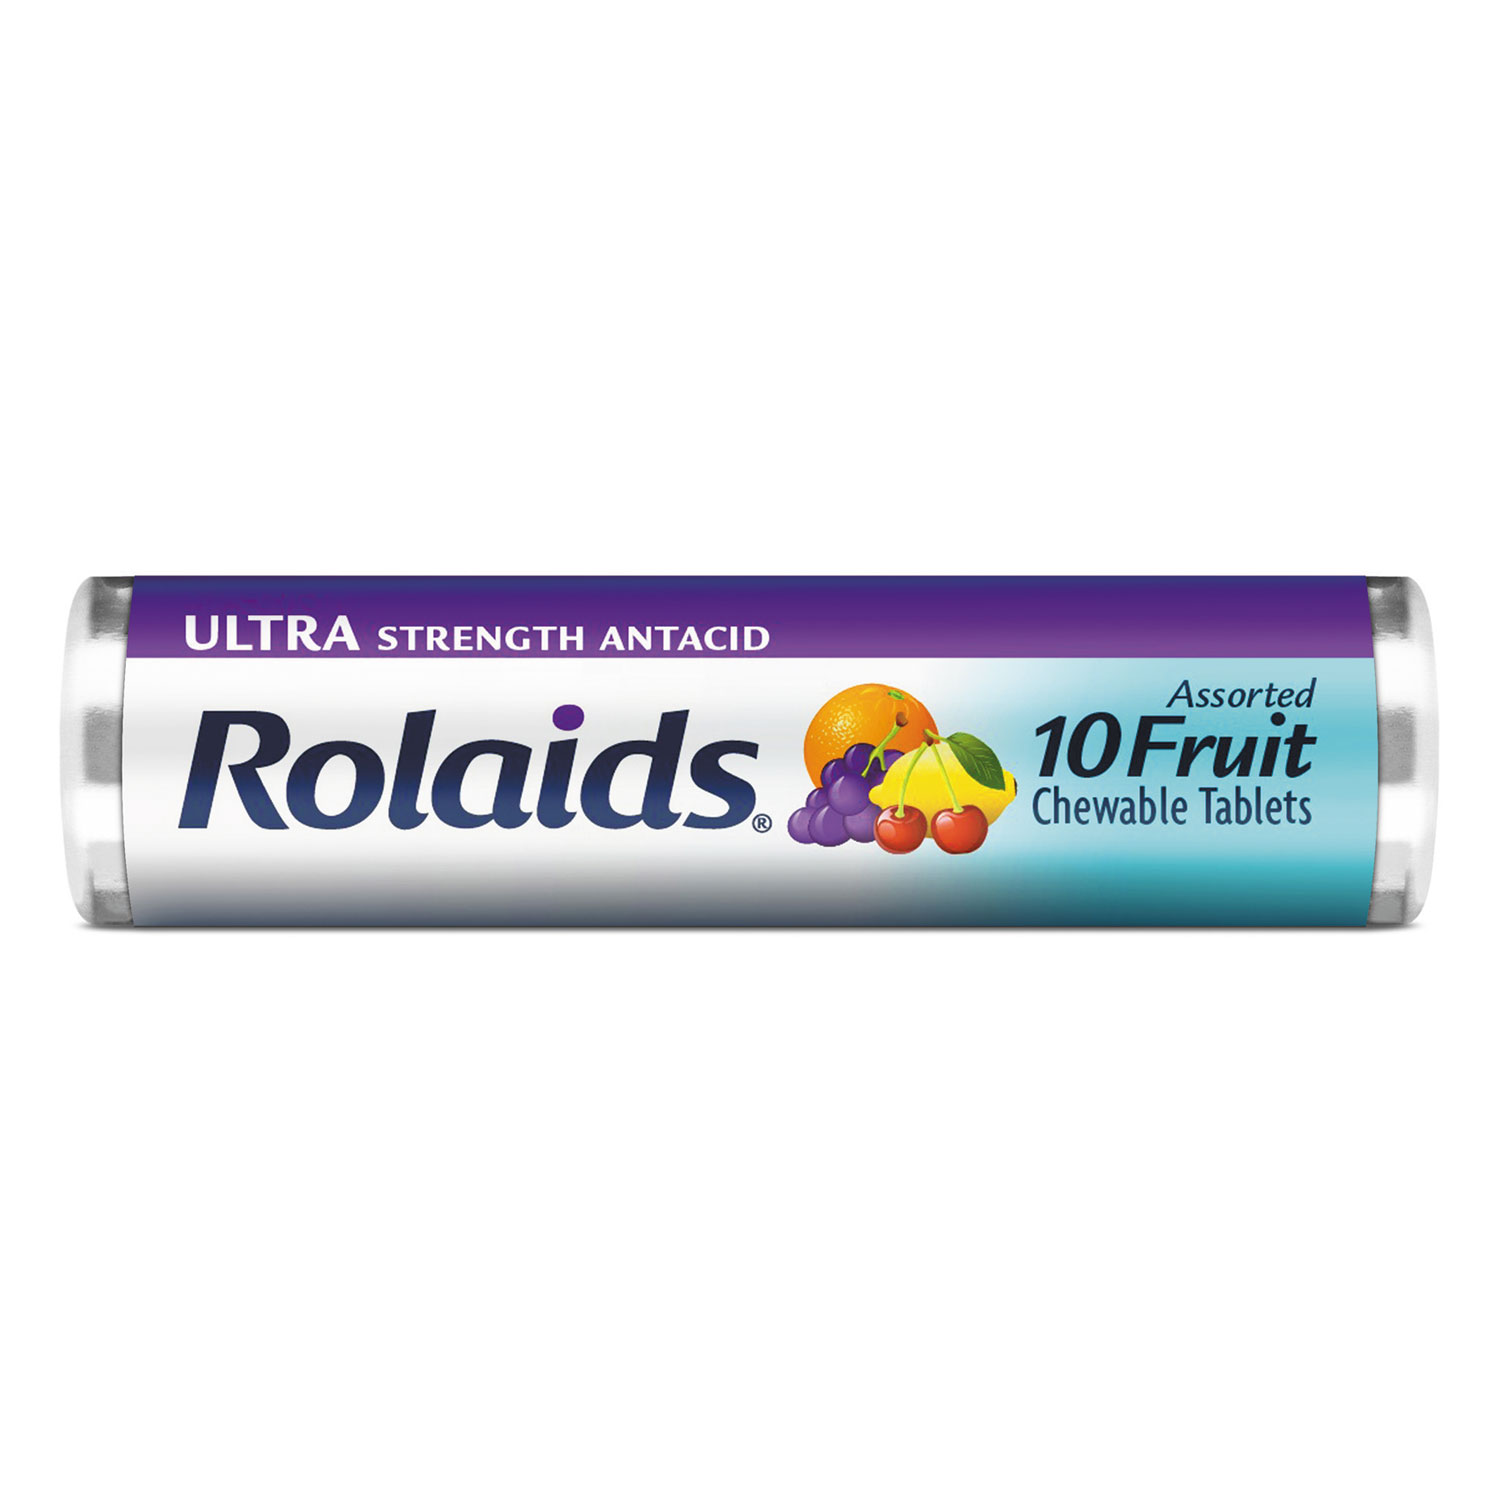  Rolaids R10049 Ultra Strength Antacid Chewable Tablets, Assorted Fruit, 10/Roll, 12 Roll/Box (LILR10049) 